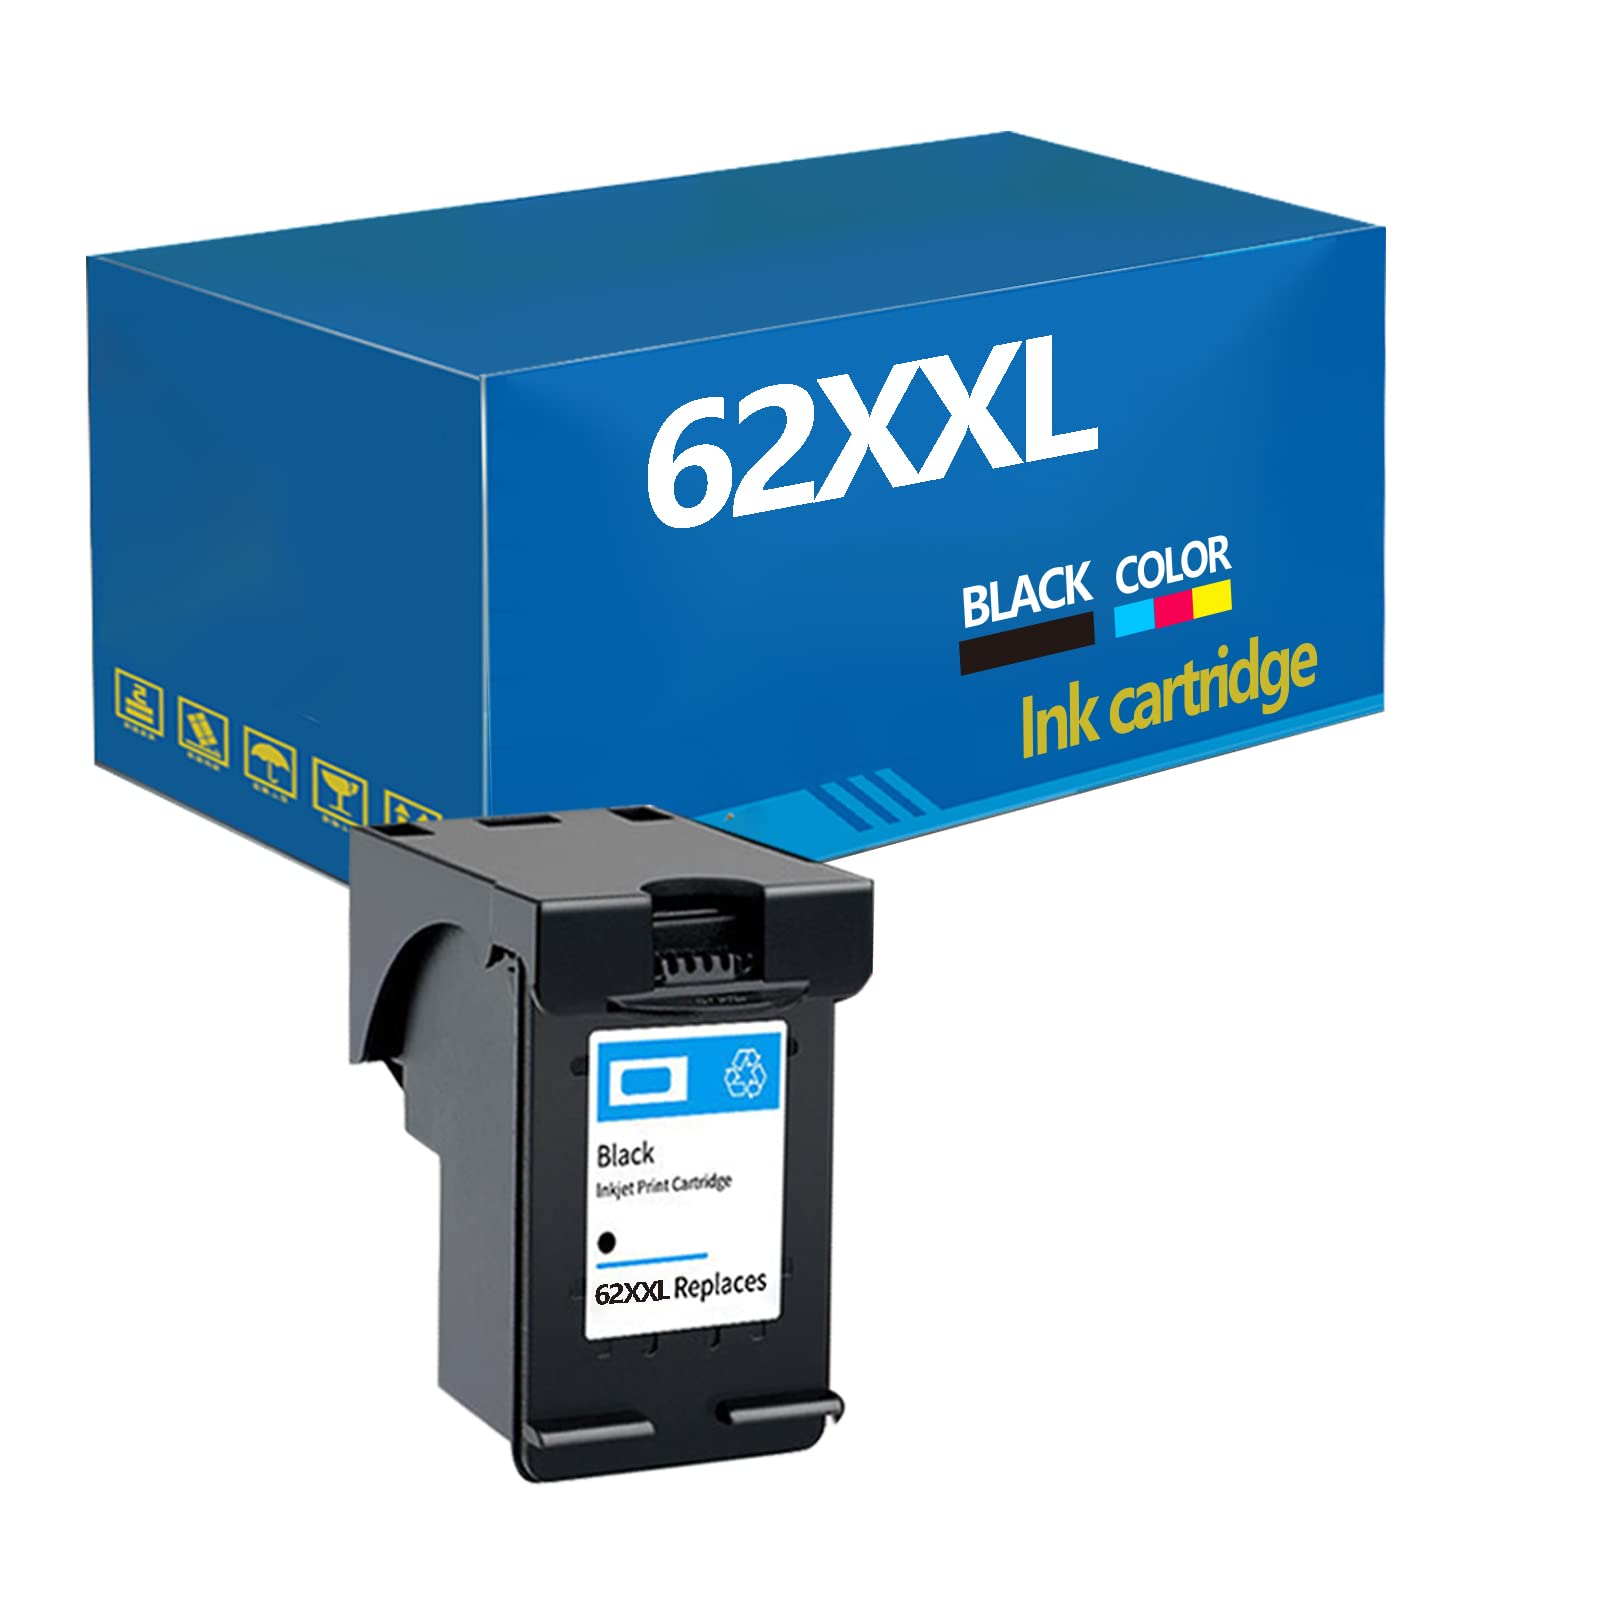 62XXL Compatible Ink Cartridge Replacement for HP OfficeJet 200 200c 250 250c 258 5740 5741 5742 5743 5744 5745 Envy 5540 5541 5542 5543 5544 5545 8000 8005 Printer Black*1